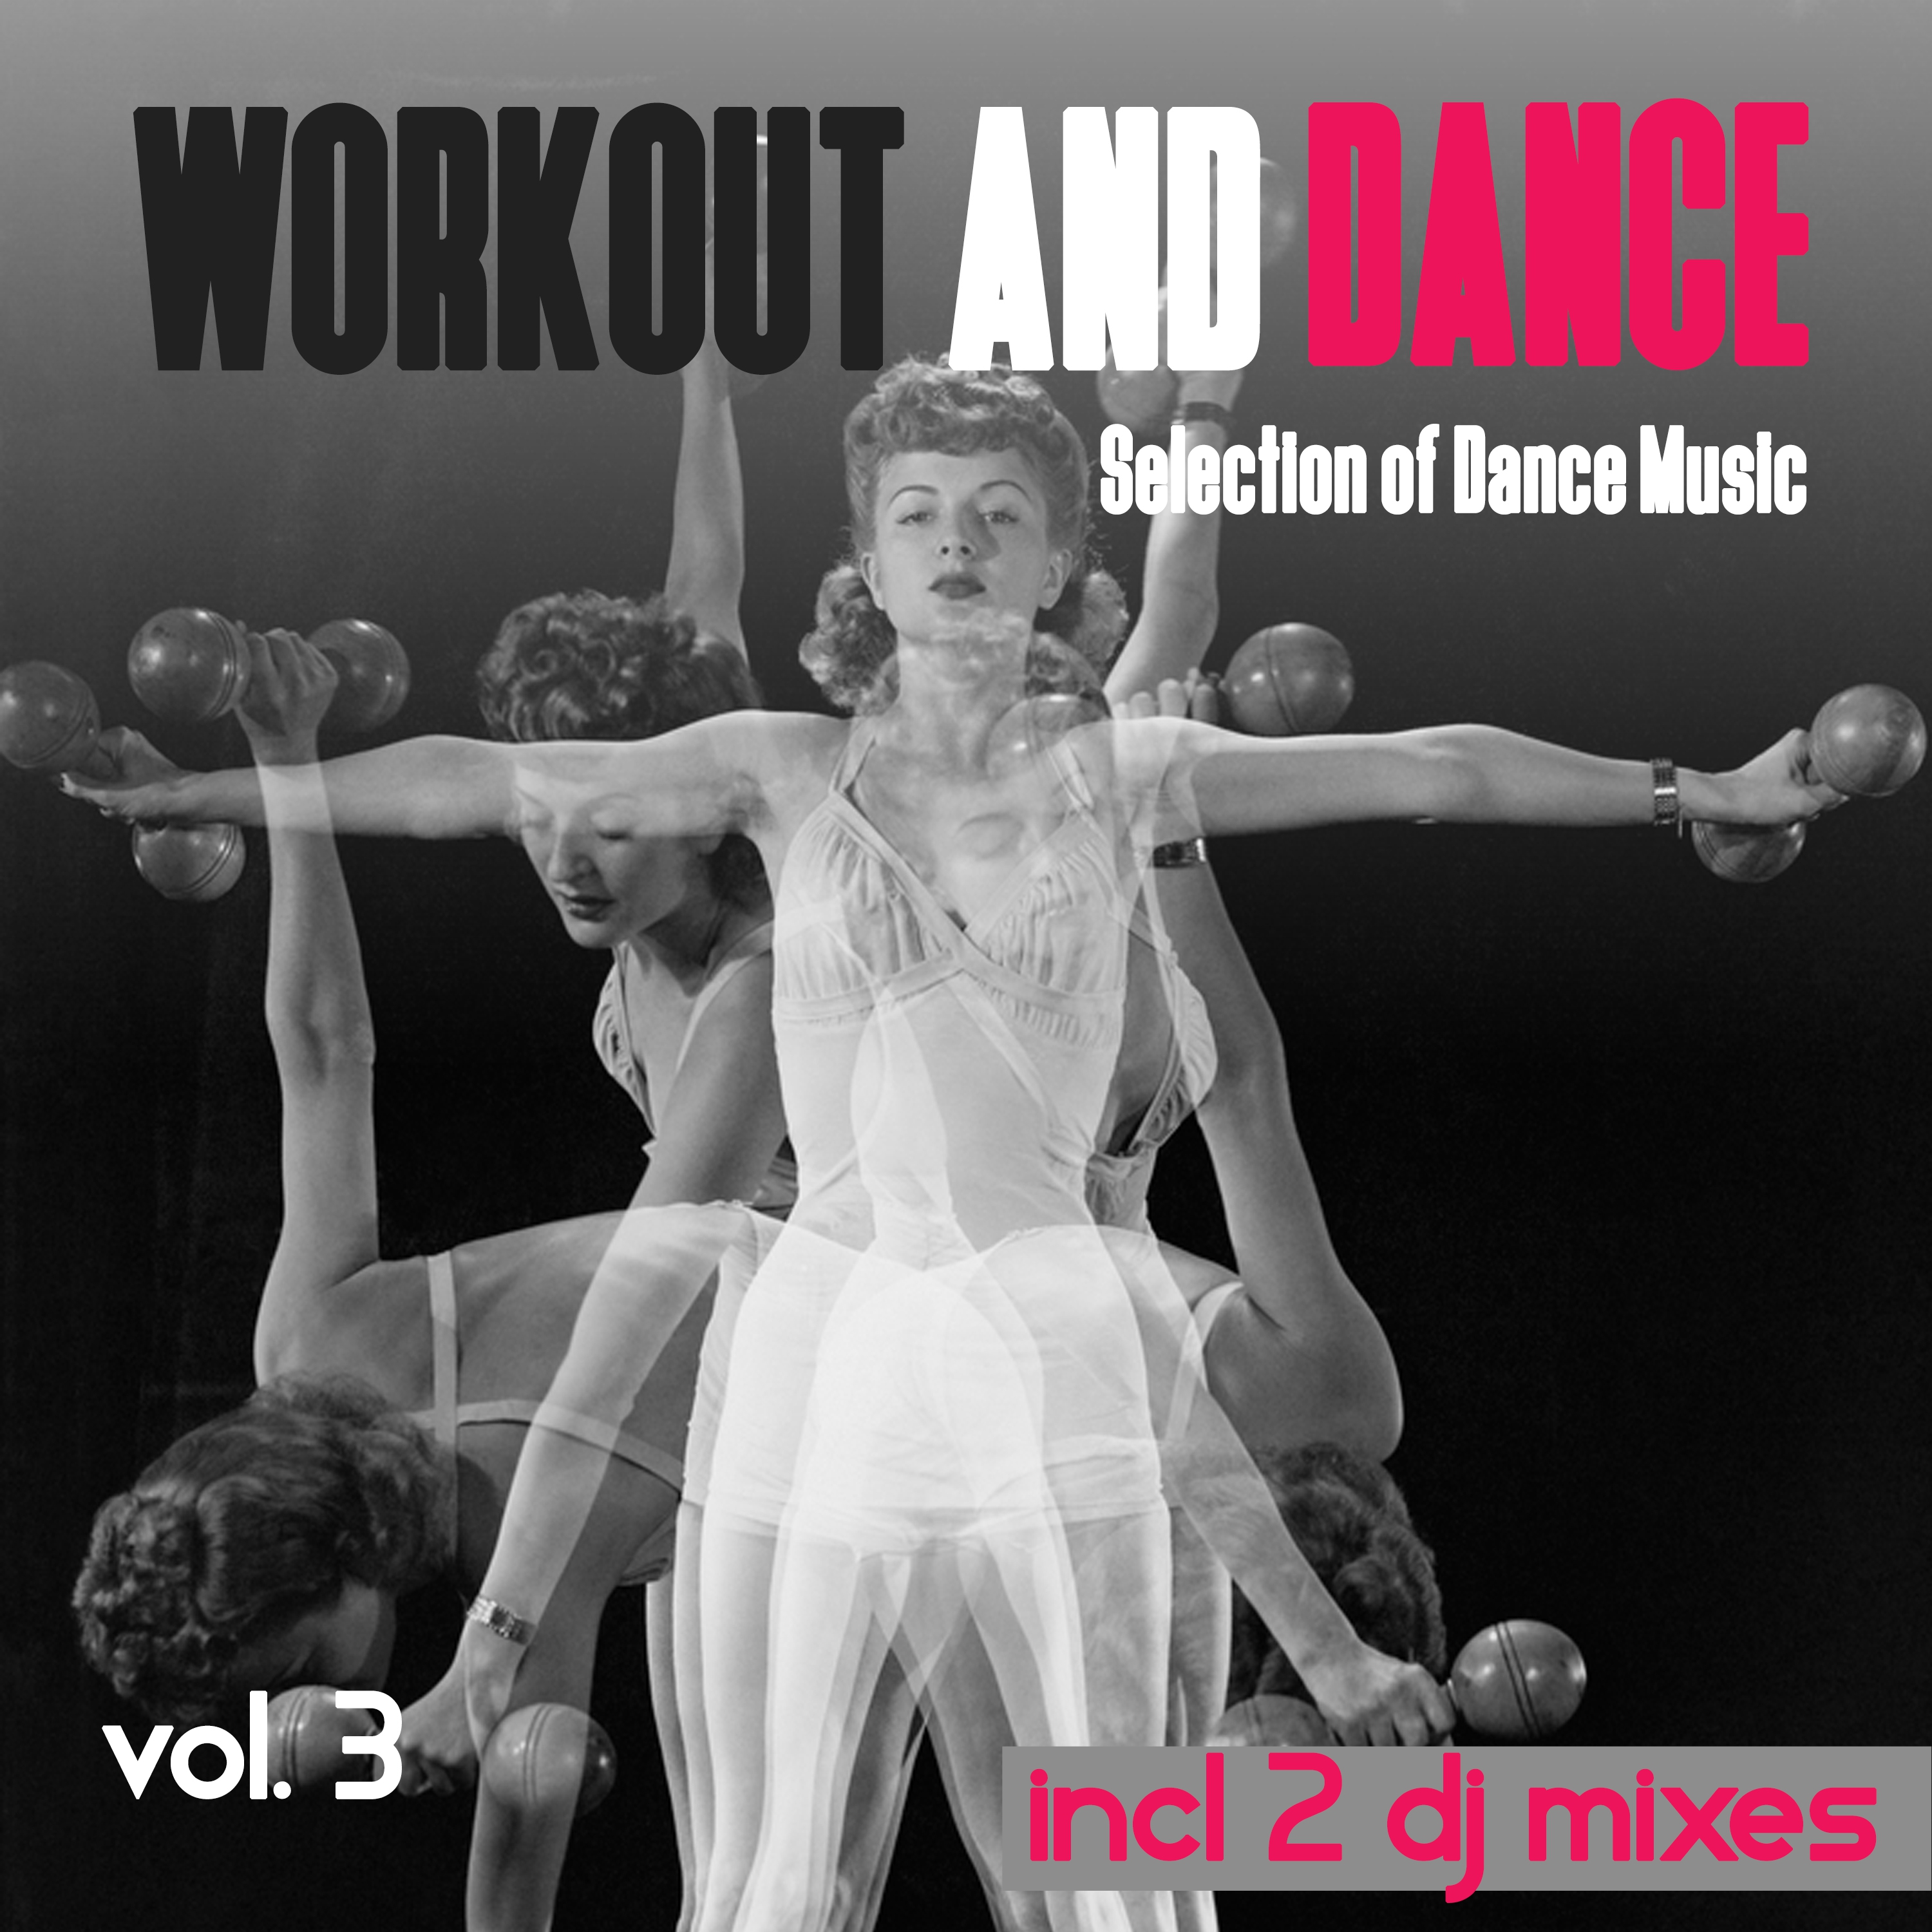 Workout and Dance, Vol. 3 (Mixed By Terrie Francys Junior) [30 Min Running Mix - Continuous DJ Mix]